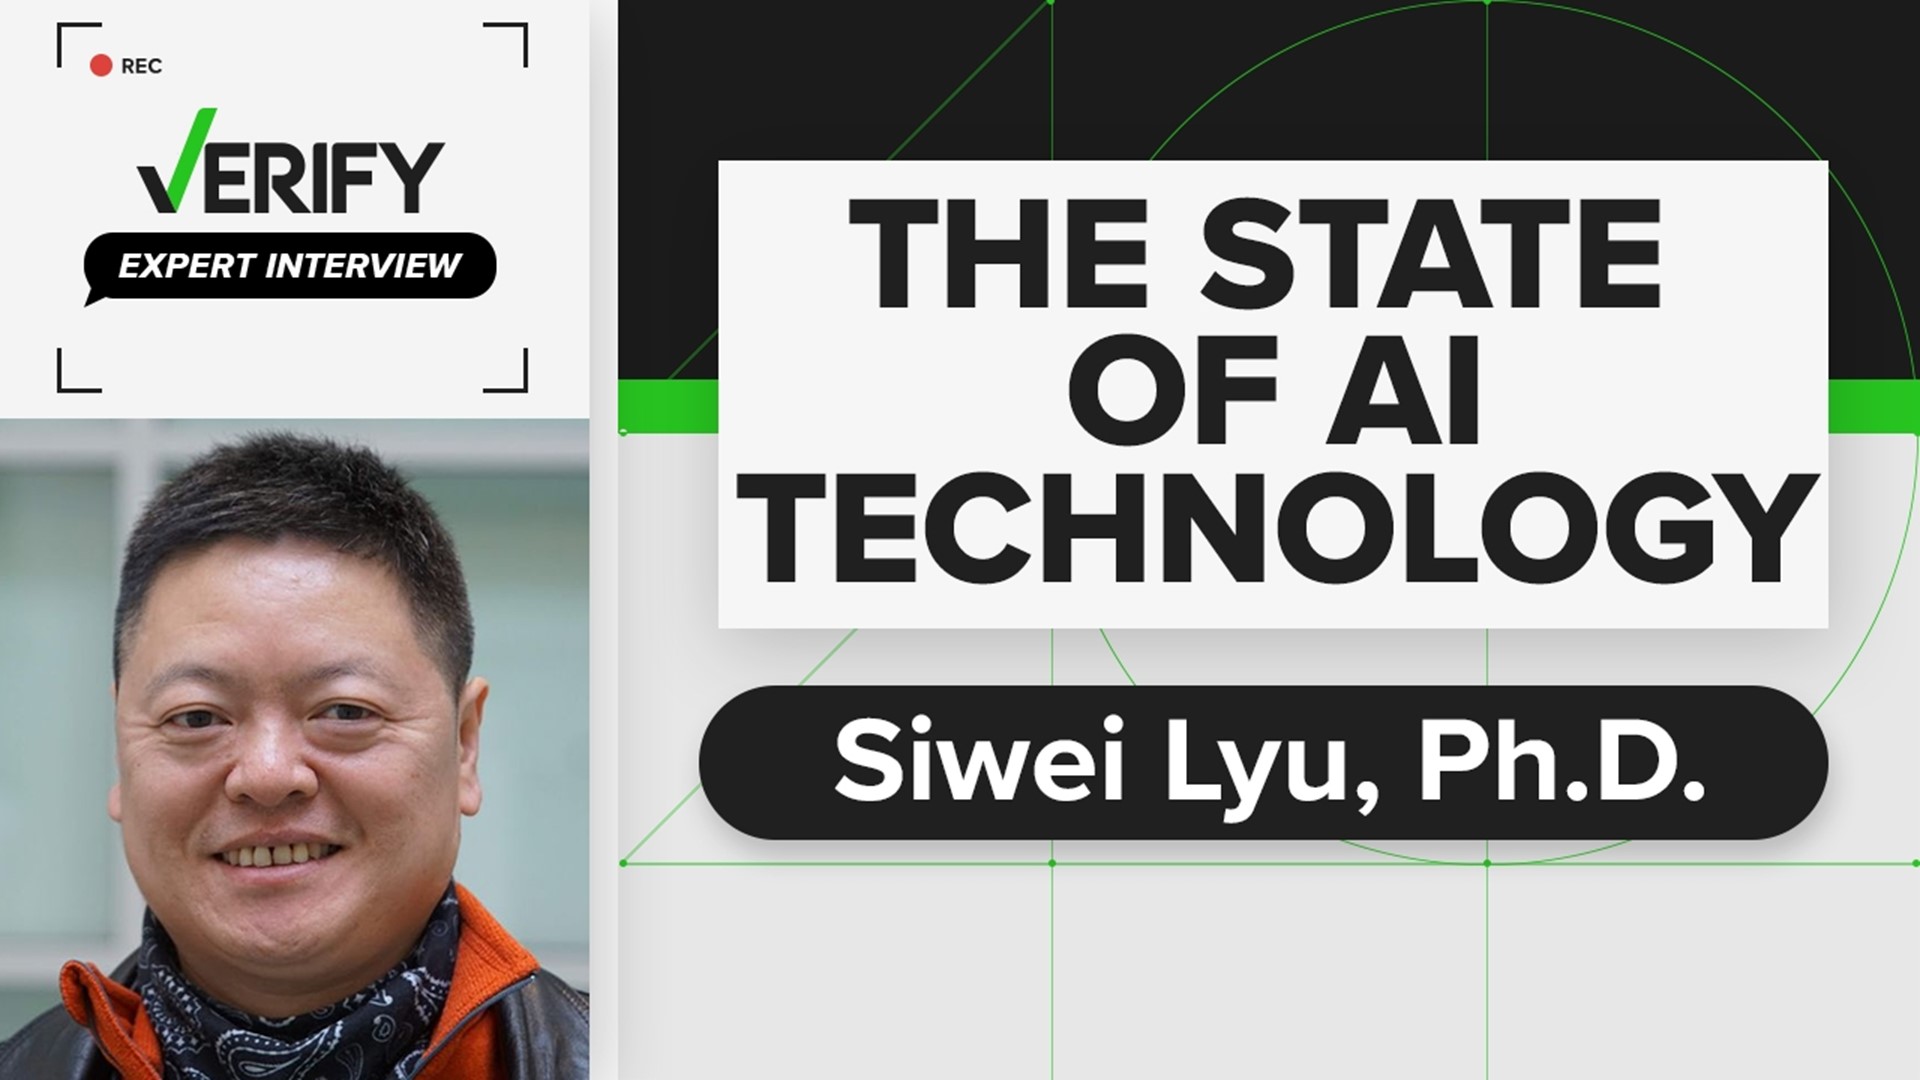 Siwei Lyu, Ph.D., Professor of Computer Science and Engineering with Buffalo State University discusses the current and future state of AI technology.